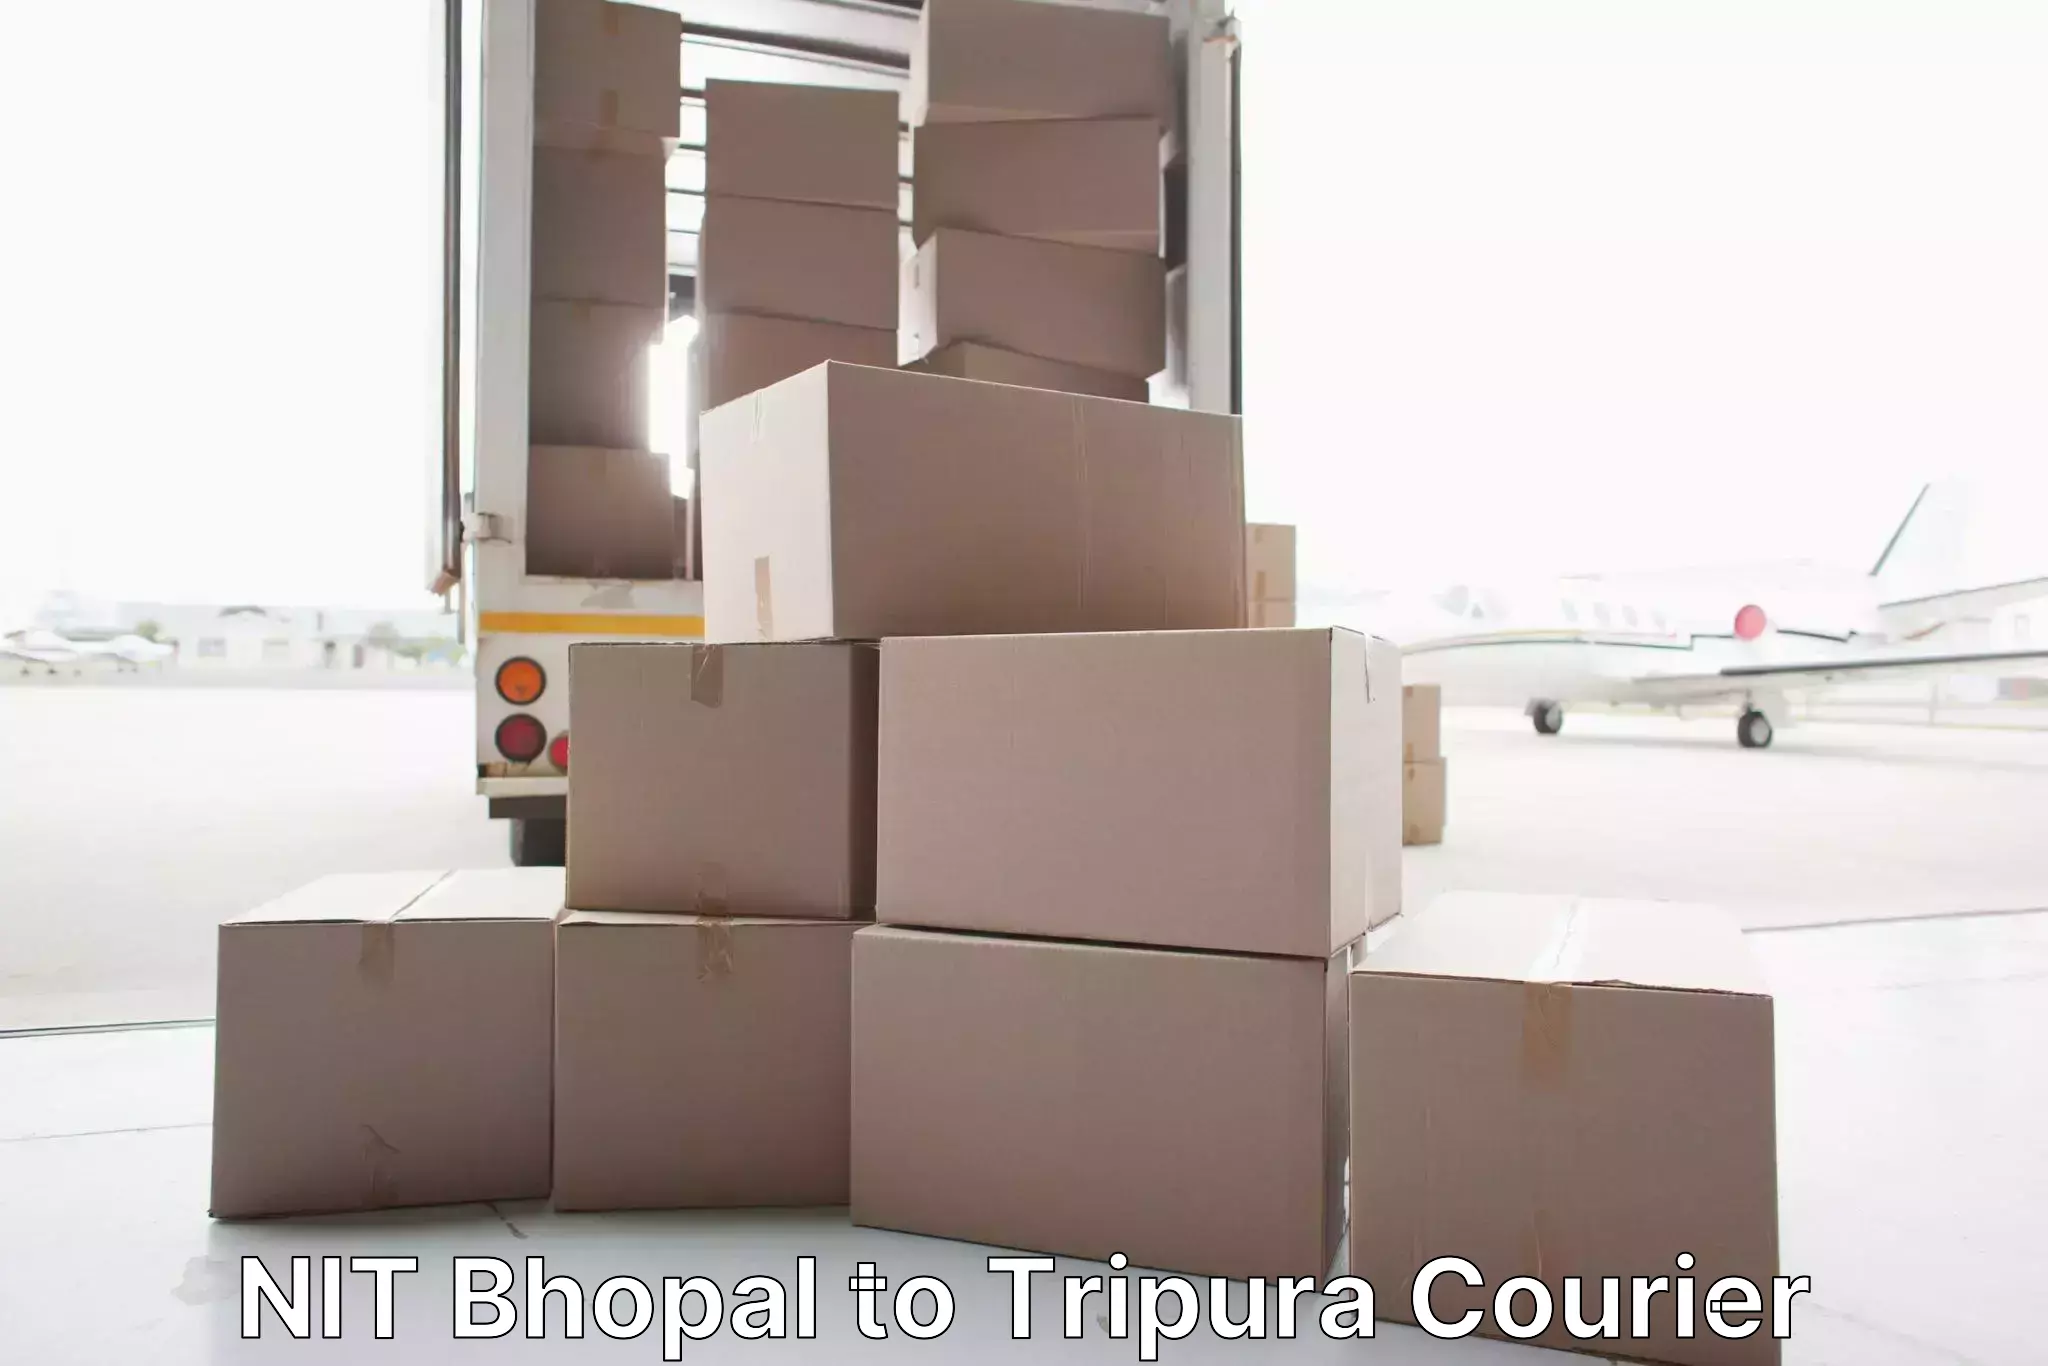 Professional packing services in NIT Bhopal to Agartala